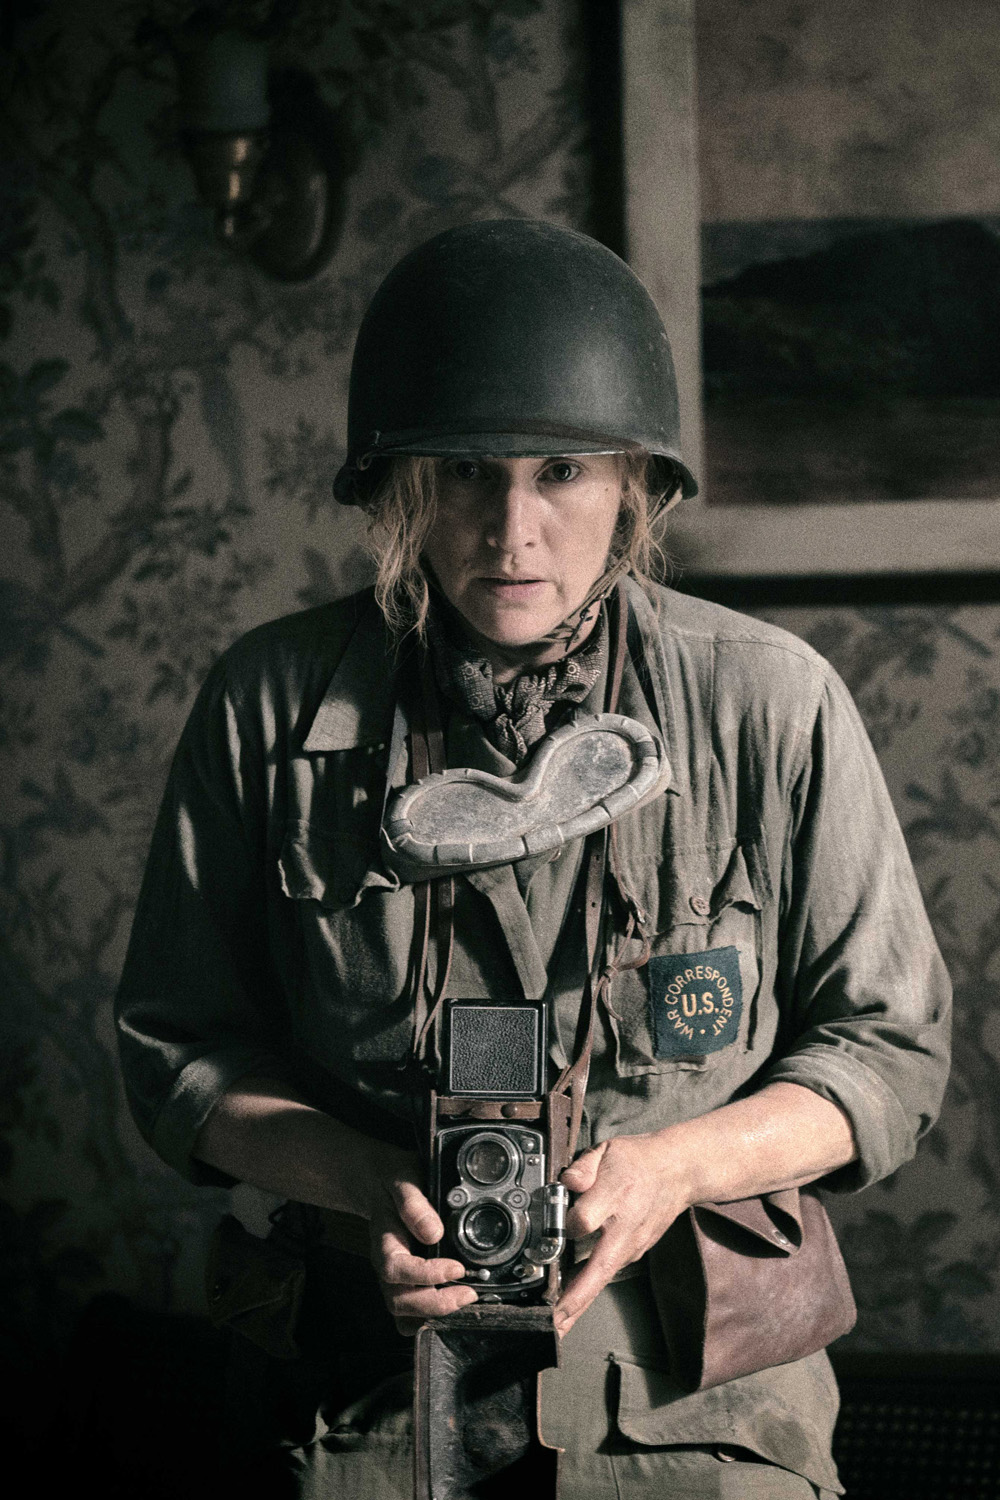 Lee: The Full Trailer For Kate Winslet's Wartime Drama Is Here